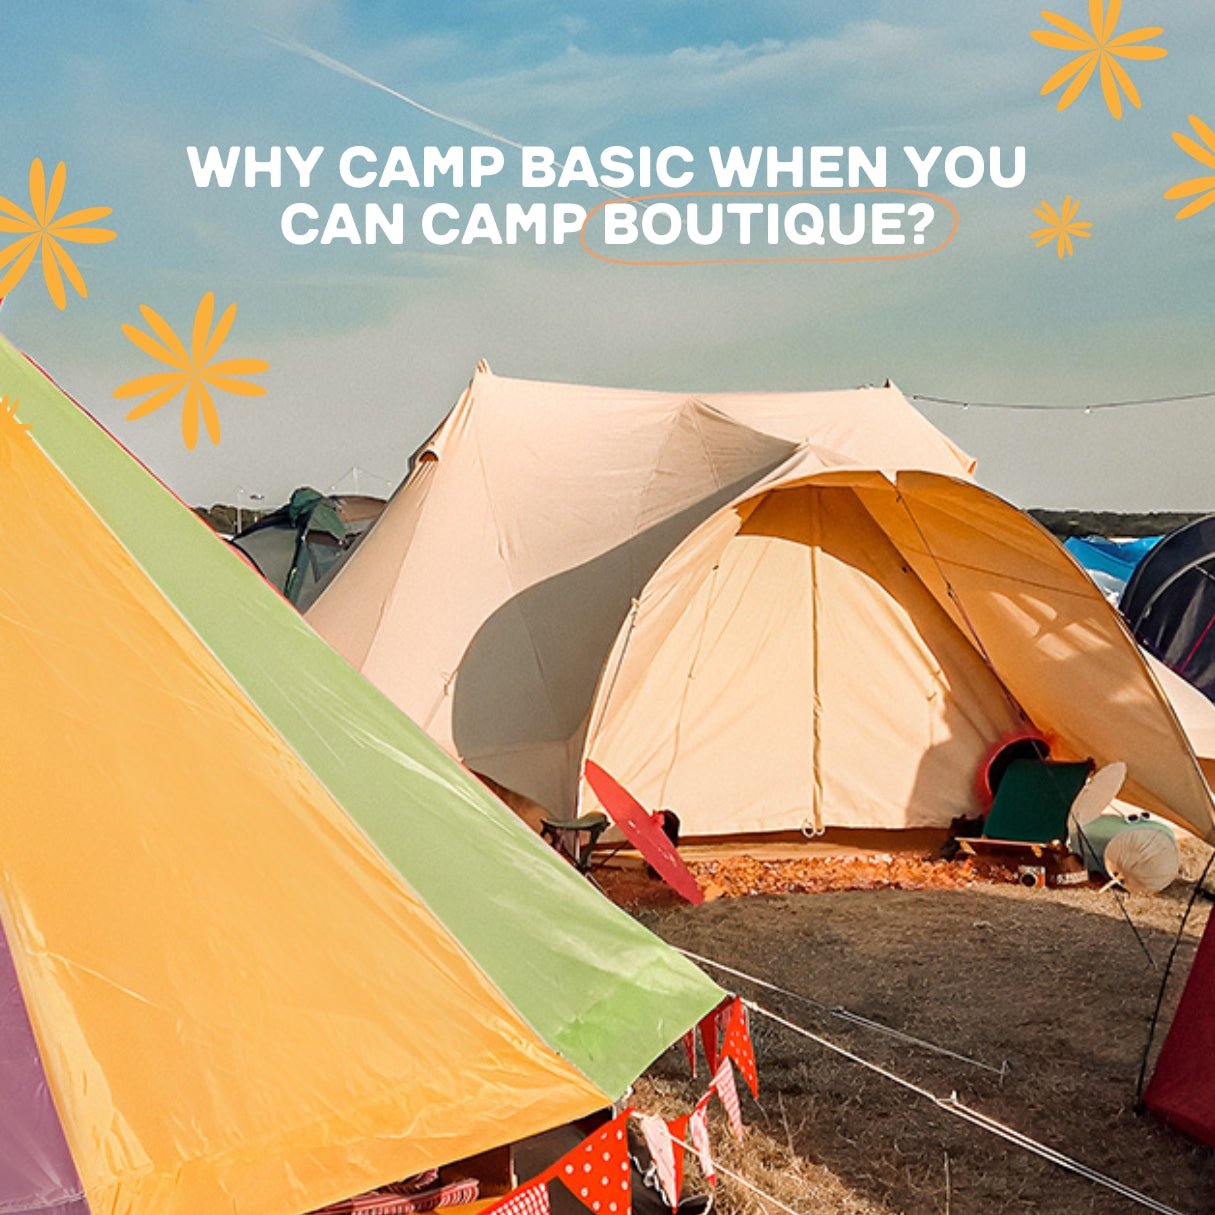 WHY CAMP BASIC WHEN YOU CAN CAMP BOUTIQUE